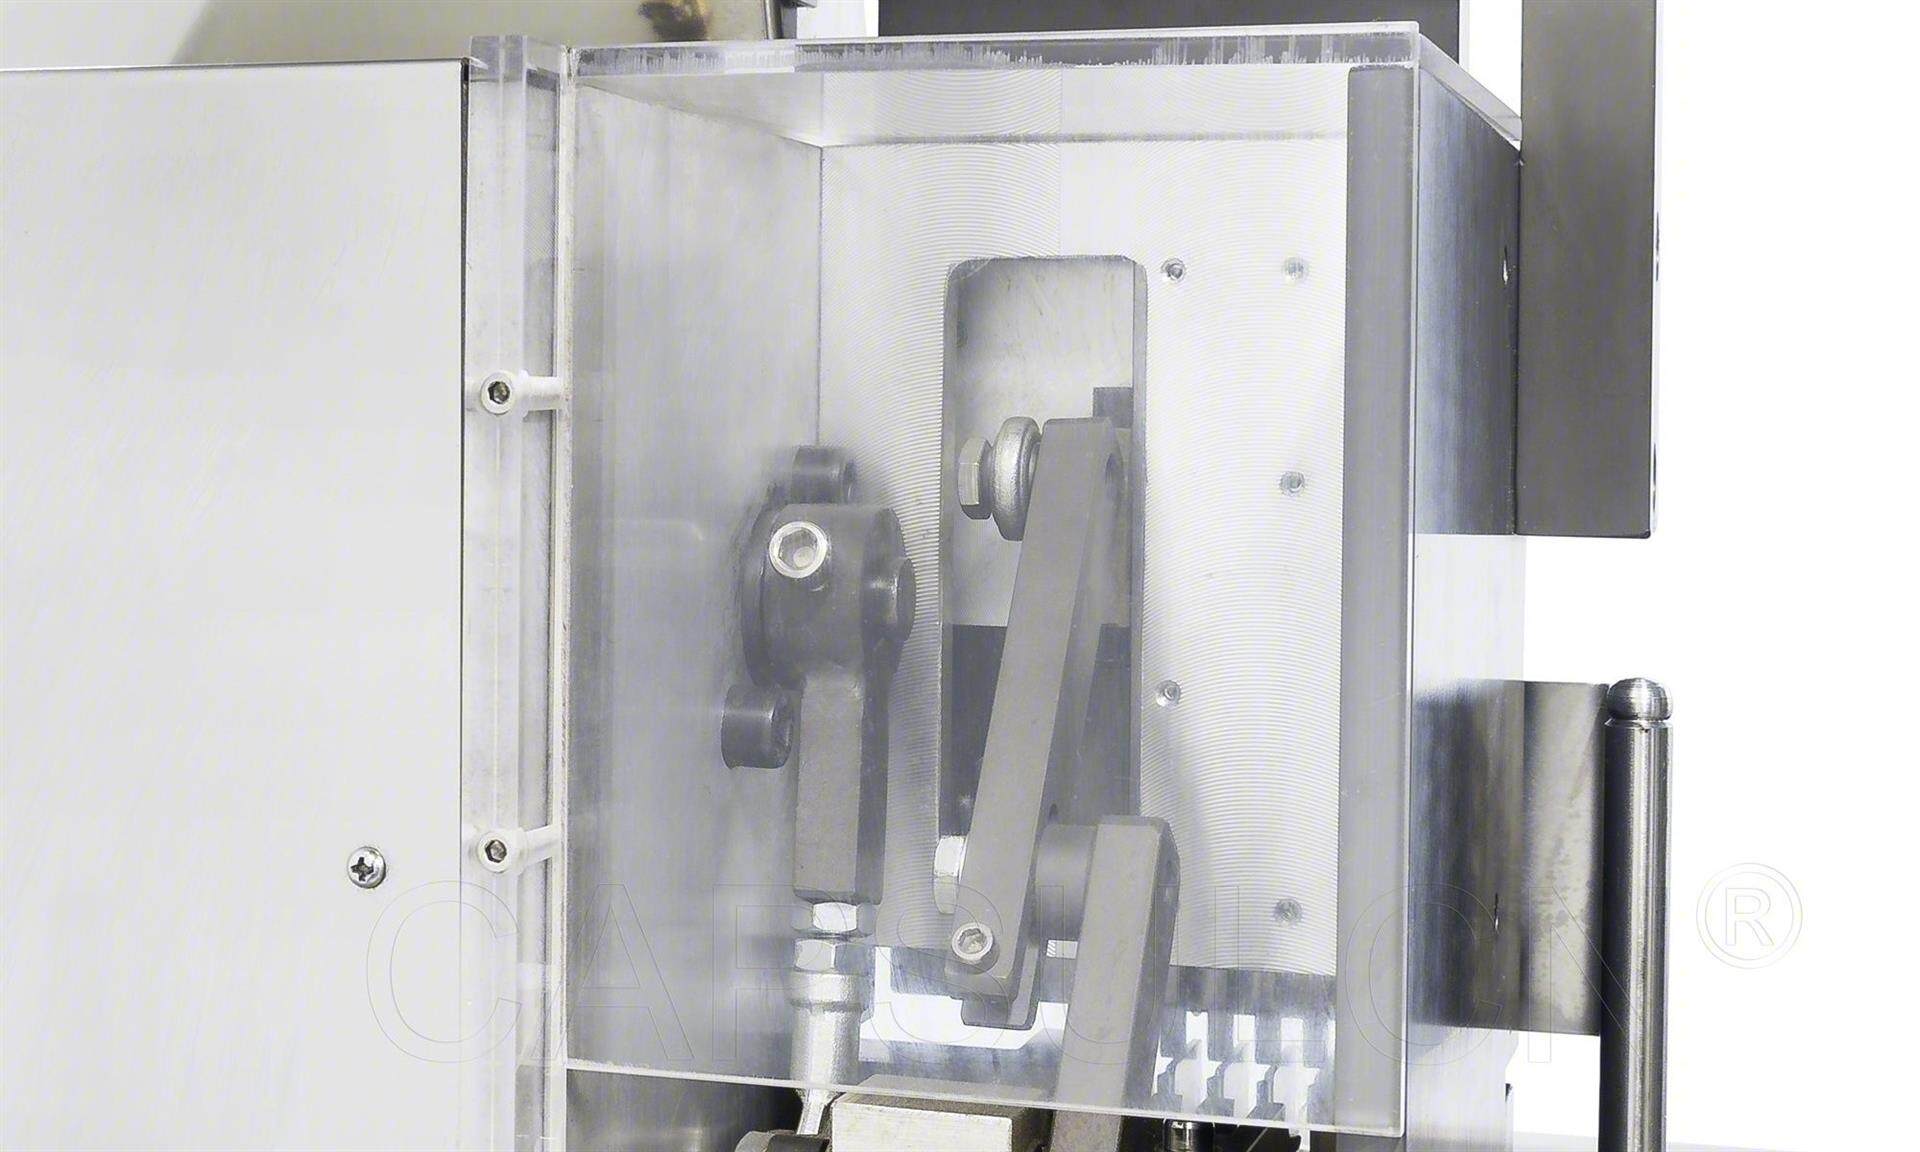 safety features of semi auto capsule filler